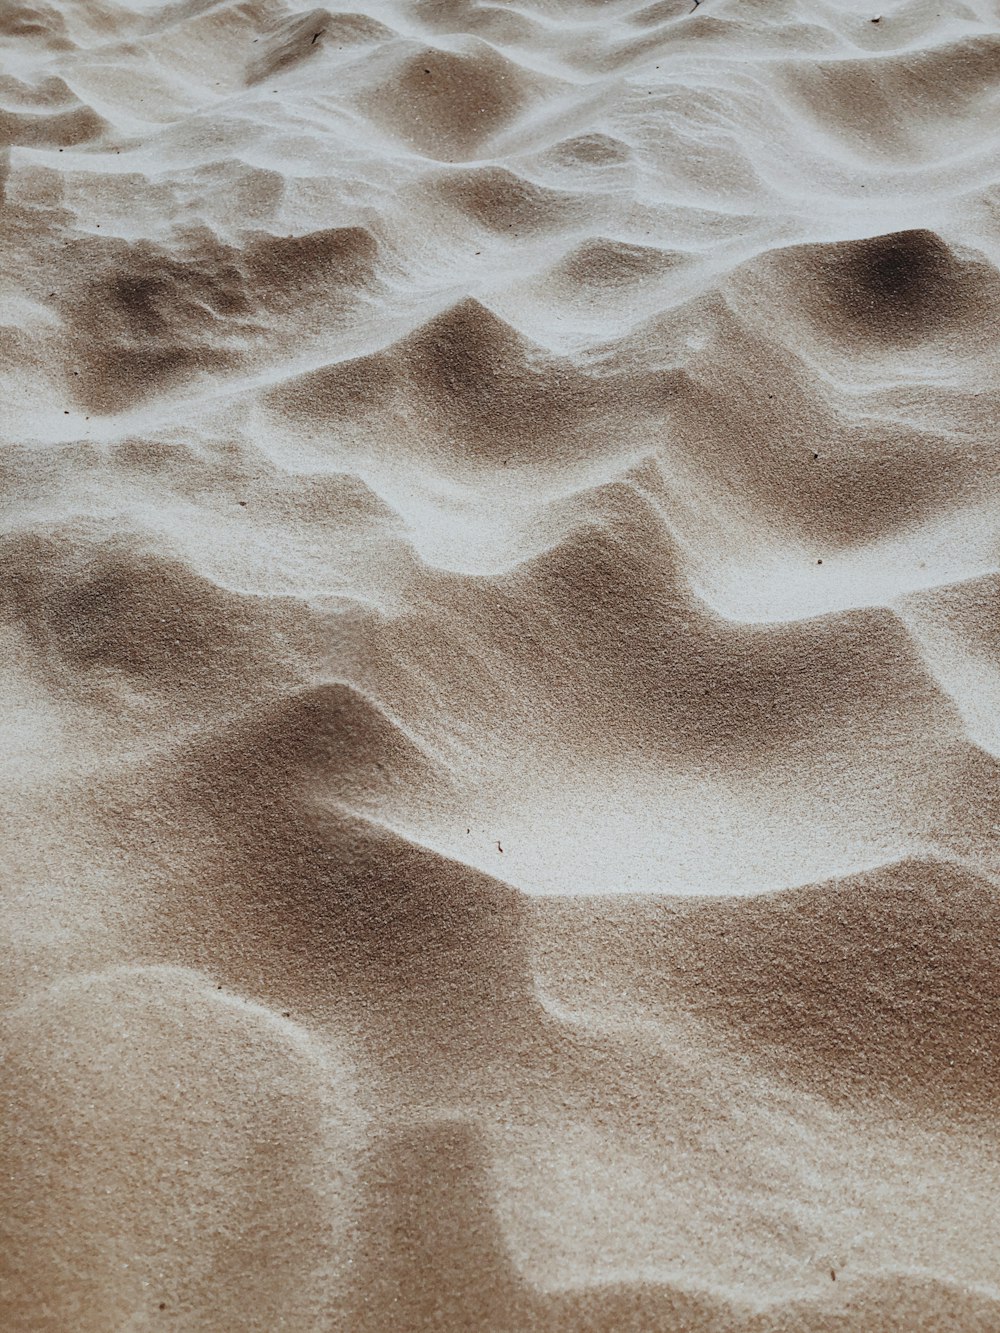 gray sand with water droplets